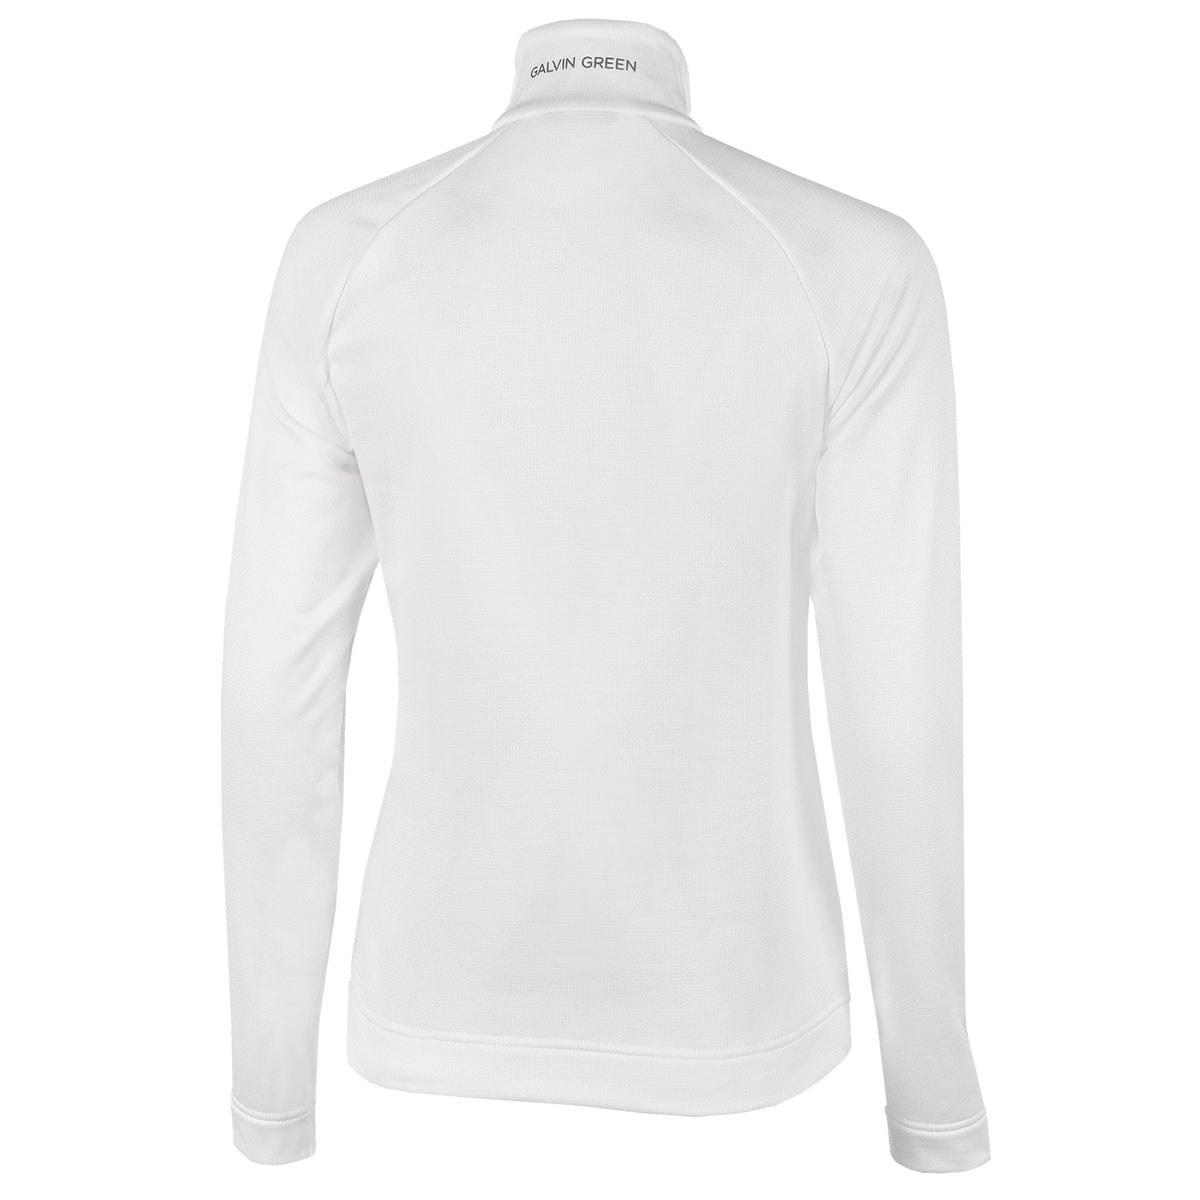 Galvin Green Ladies Dolly Golf Midlayer from american golf